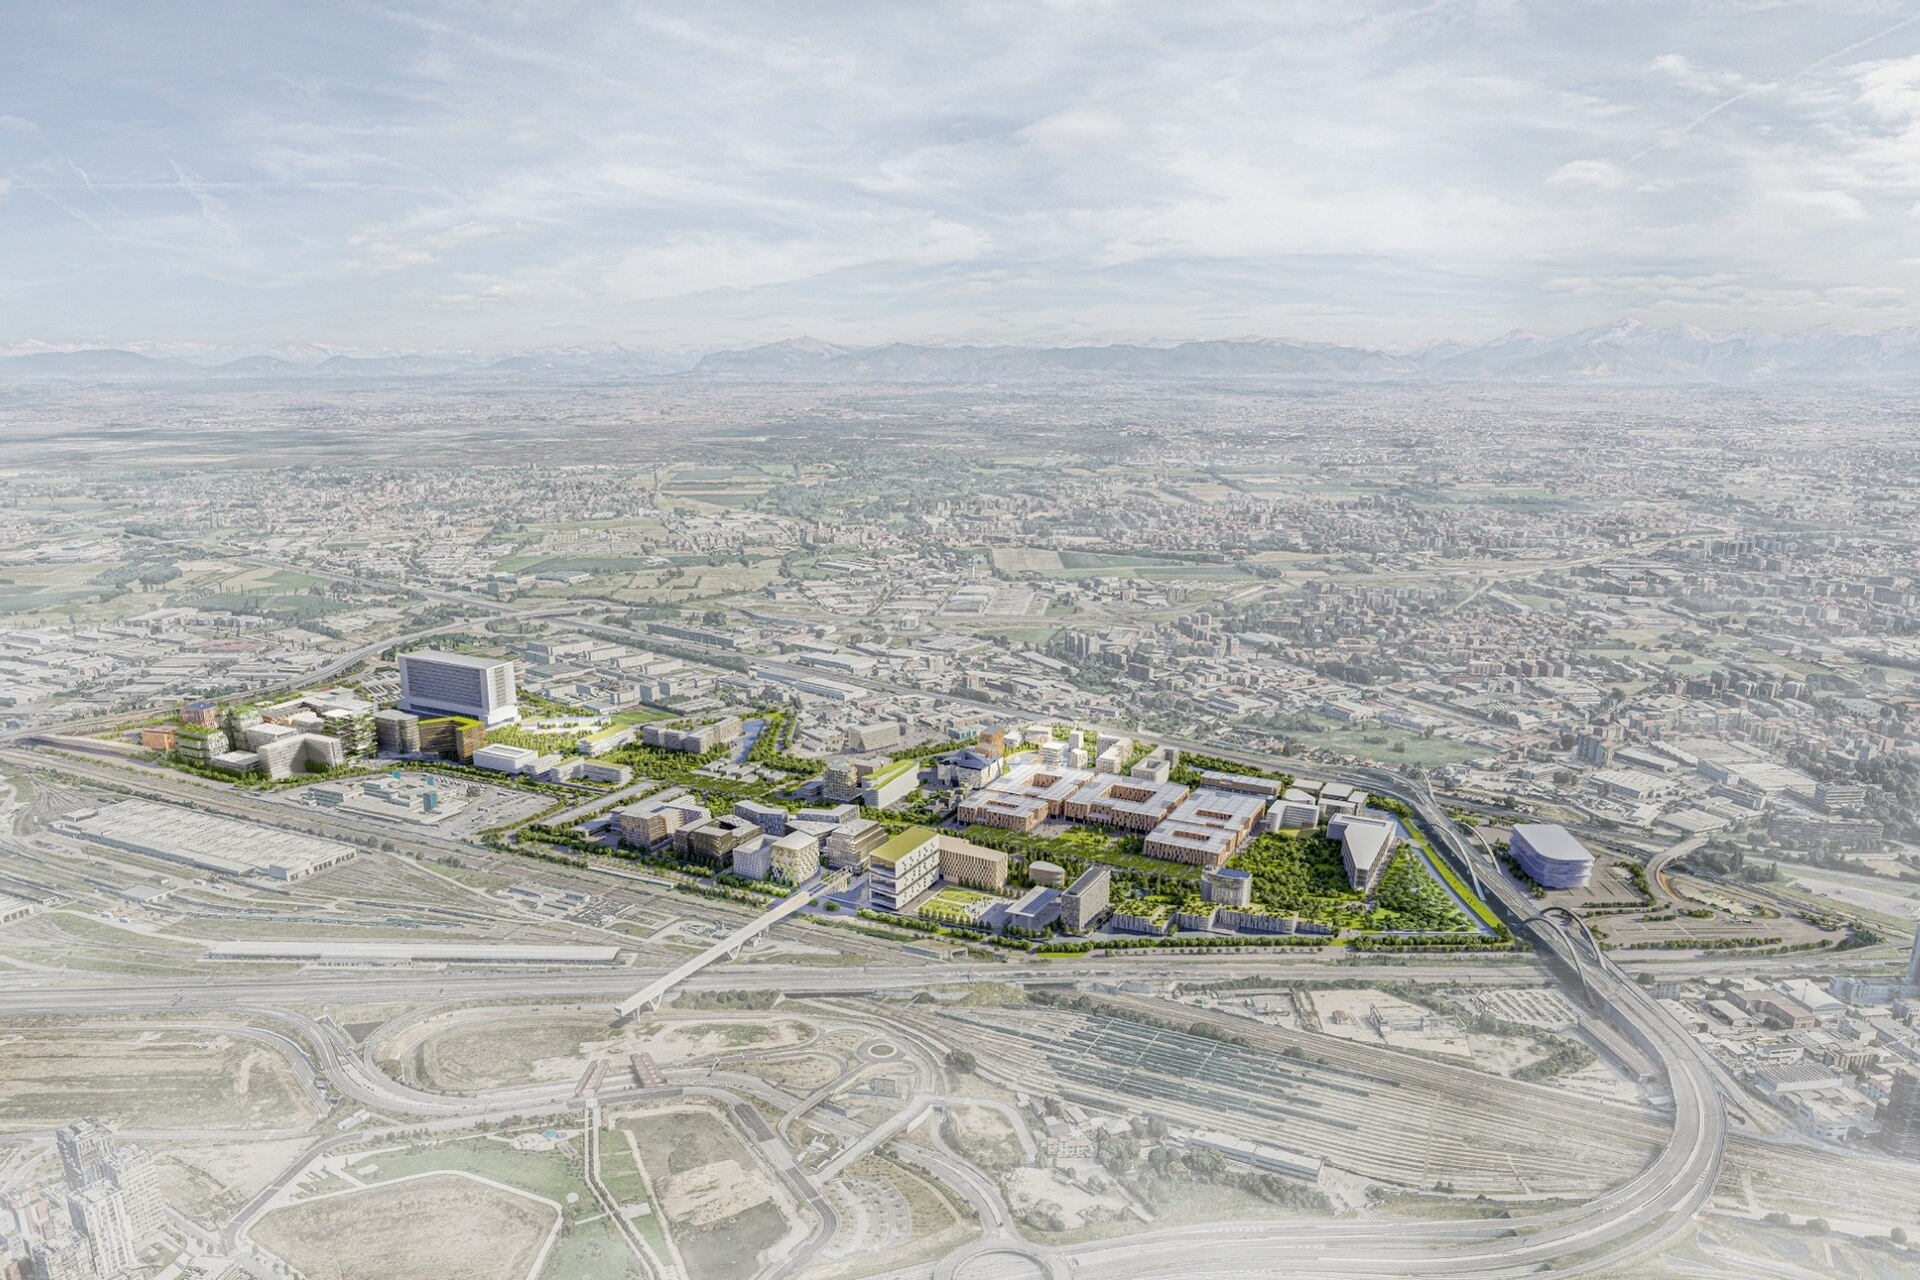 Life sciences: the plan of MIND, the Milan Innovation District, an innovation hub project that rises in the area used by the 2015 universal exposition and is curated by Arexpo